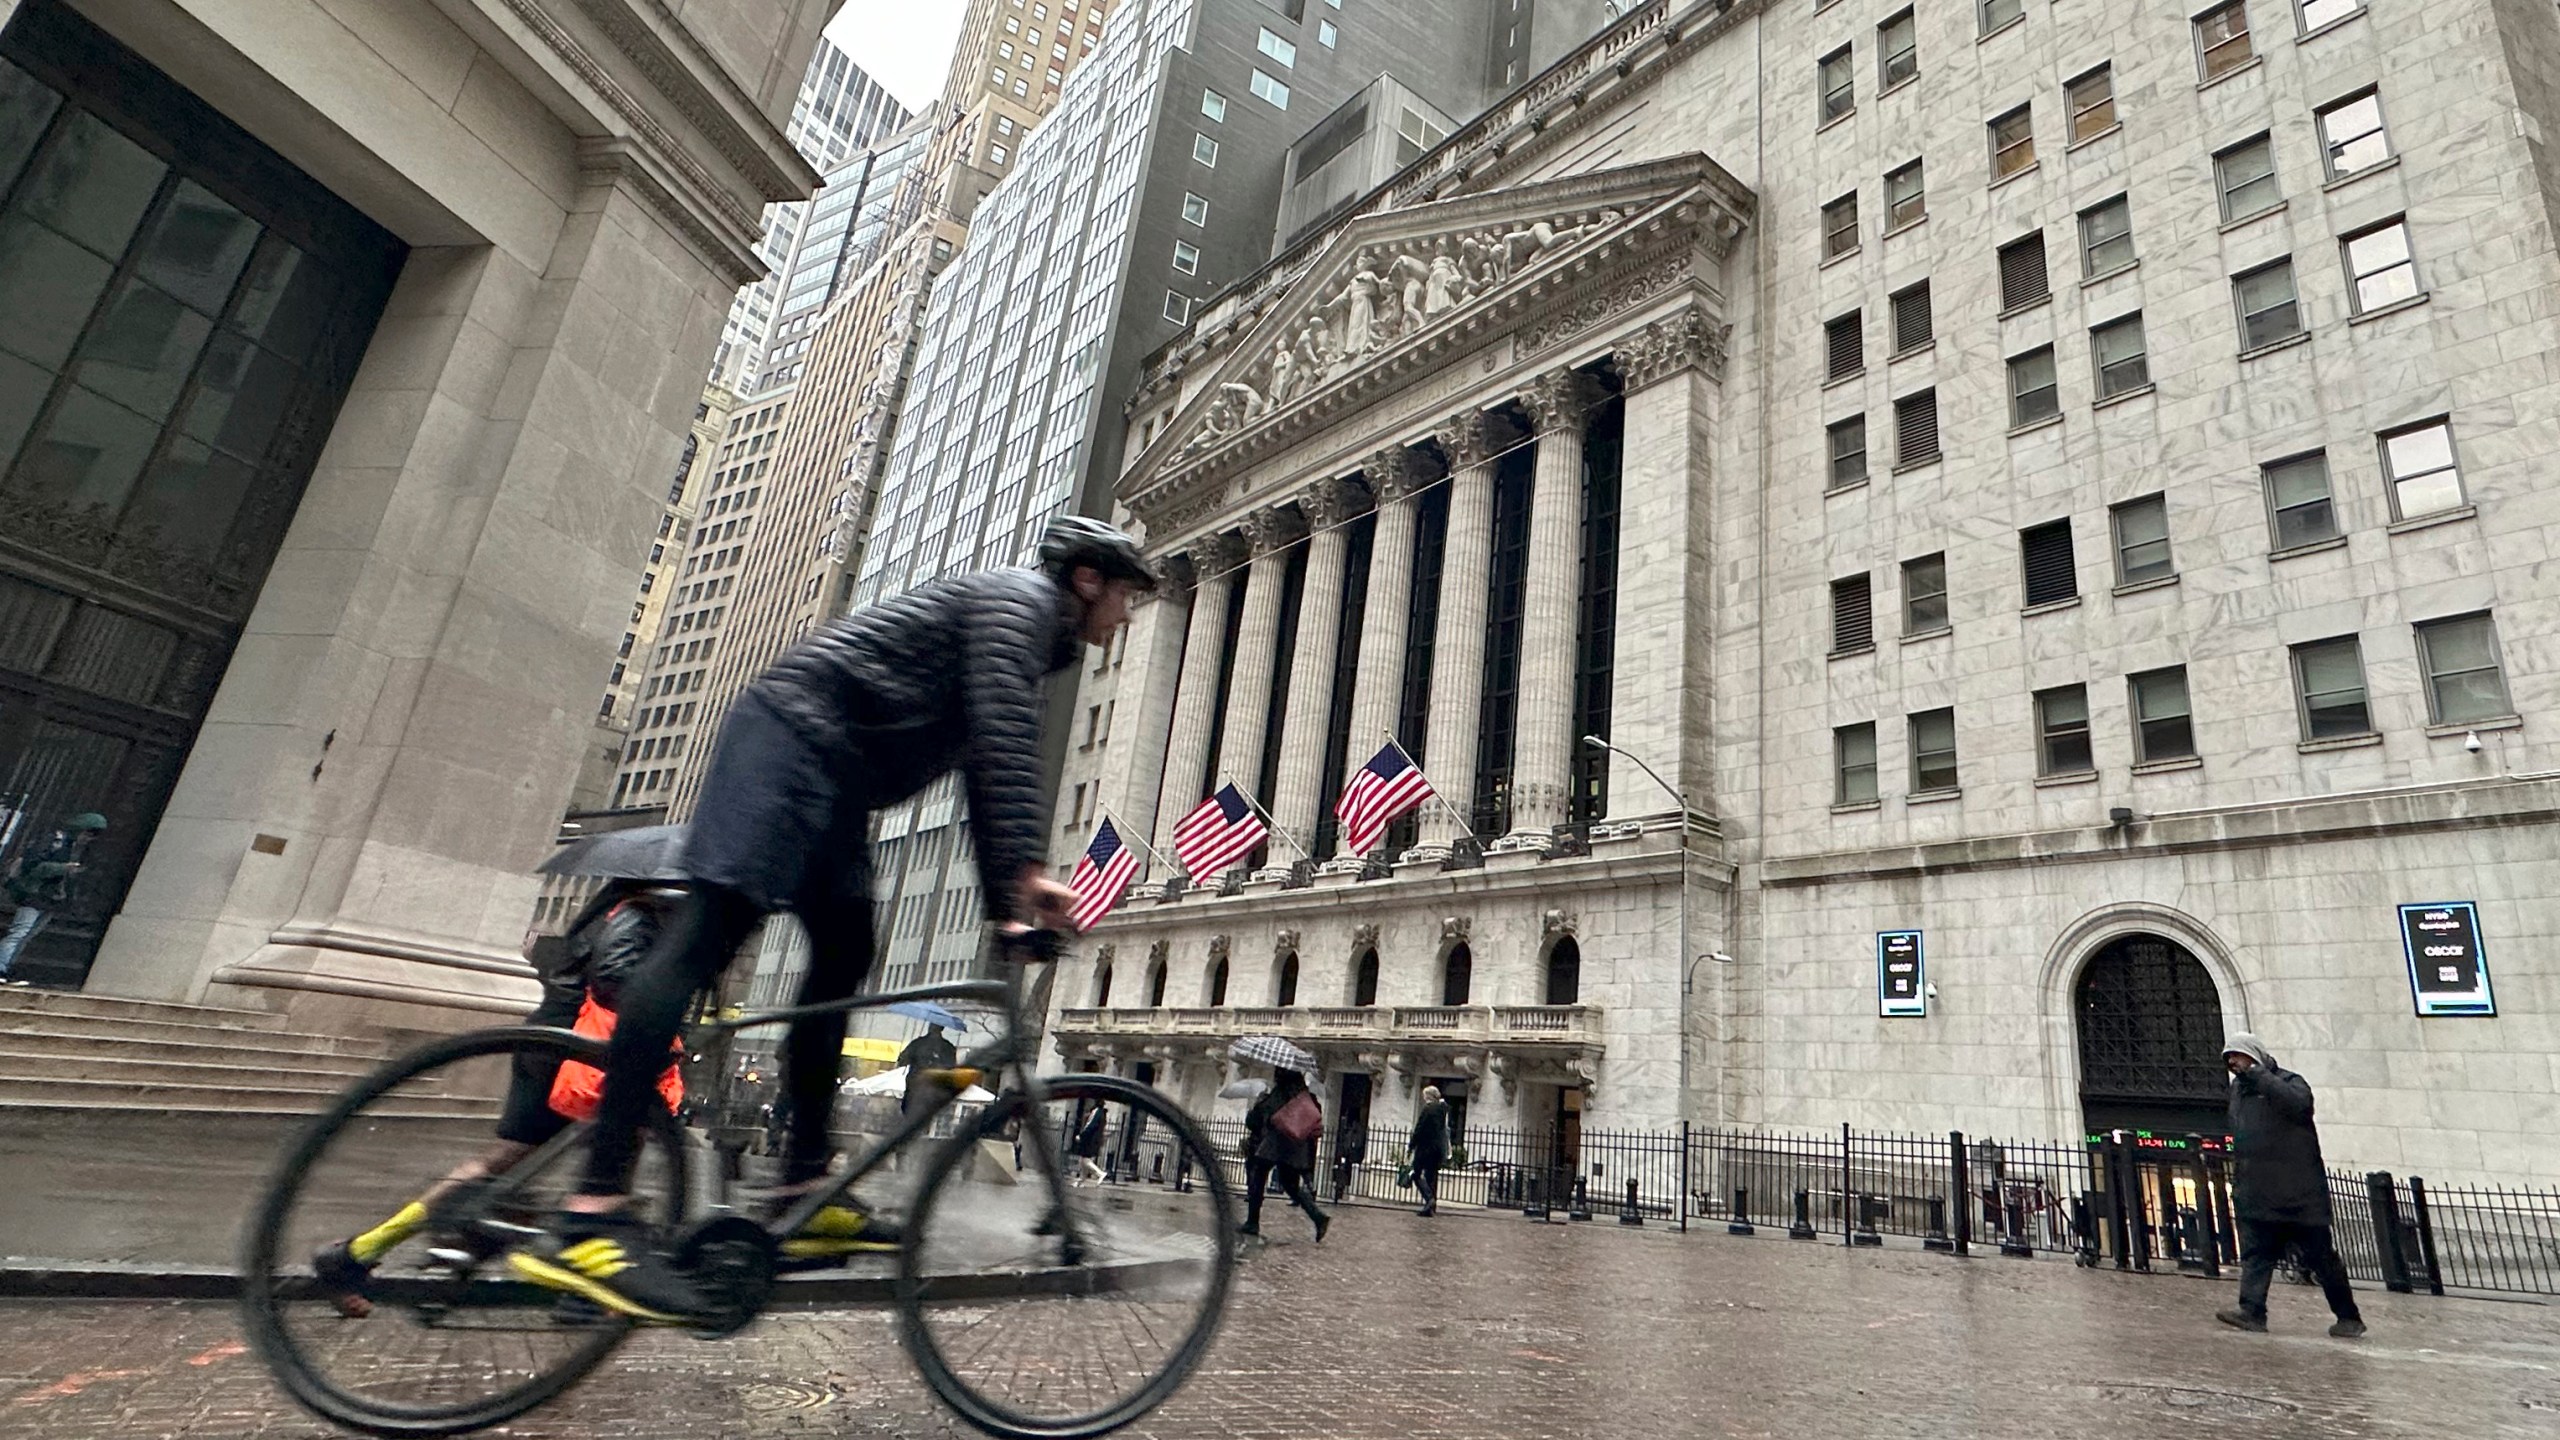 CORRECTS TO 1.1% HIGHER STED OF TK% HIGHER FILE - A bicyclist passes the New York Stock Exchange on March 5, 2024, in New York. Stocks are rising Monday, March 18, 2024 ahead of a busy week for central banks around the world that could dictate where interest rates go. The S&P 500 was 1.1% higher in early trading, coming off its first back-to-back weekly loss since October. (AP Photo/Peter Morgan, file)